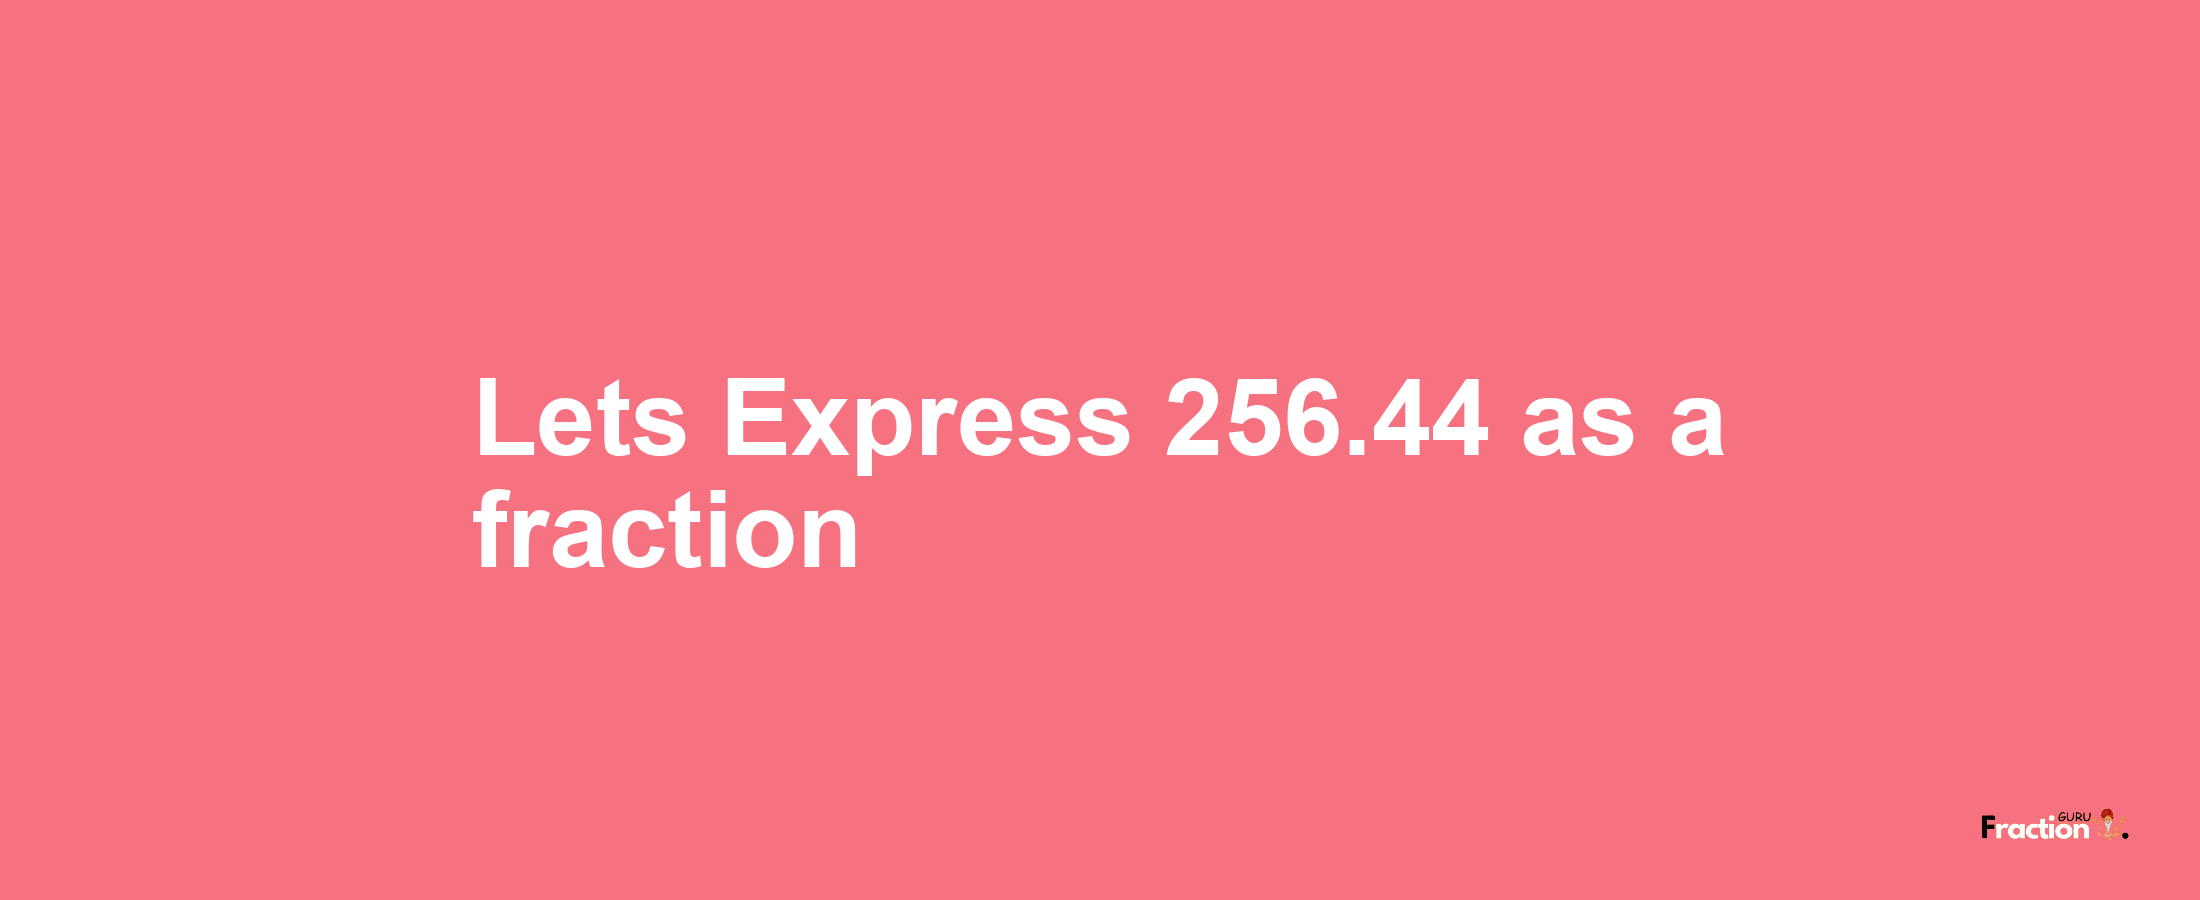 Lets Express 256.44 as afraction